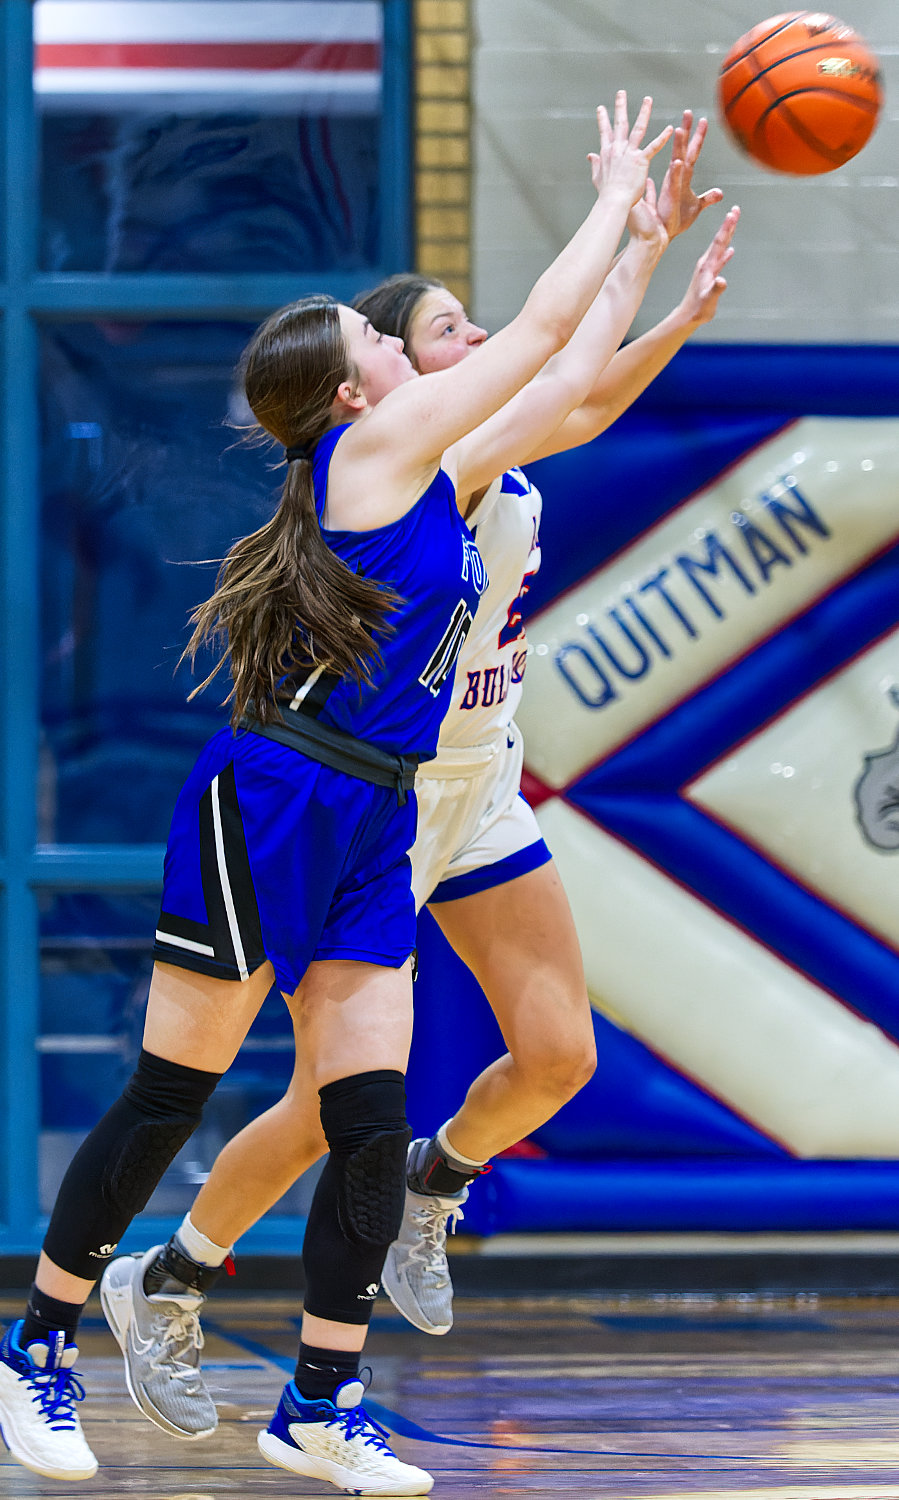 Madyson Pence steals the ball from Quinlan-Ford, which she would take all the way to the hoop. [see more shots, buy basketball photos]